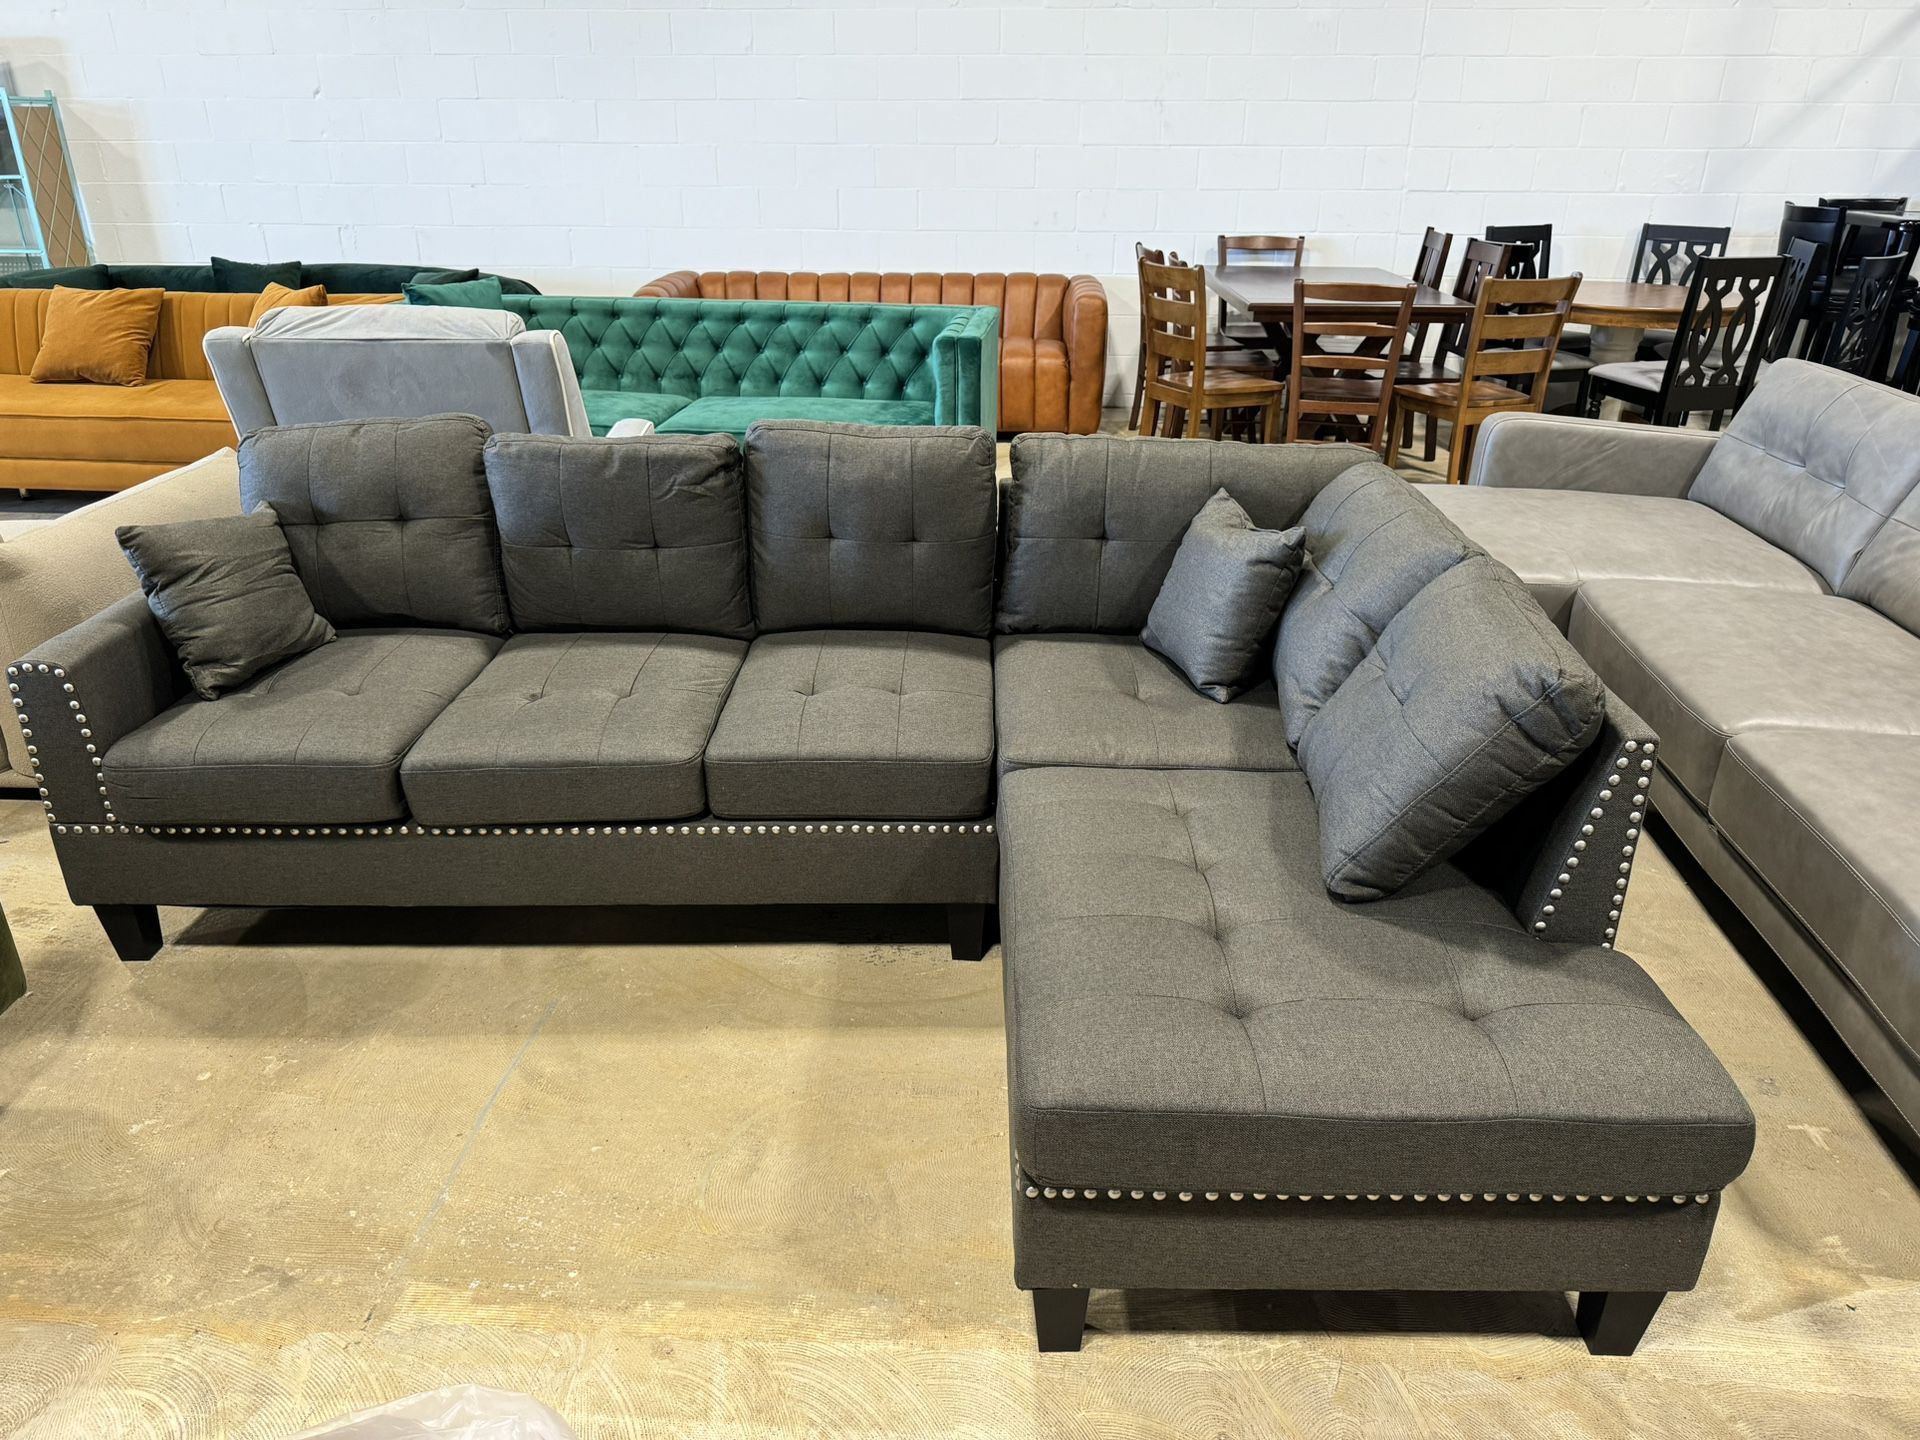 Brand new Sectional Sofa